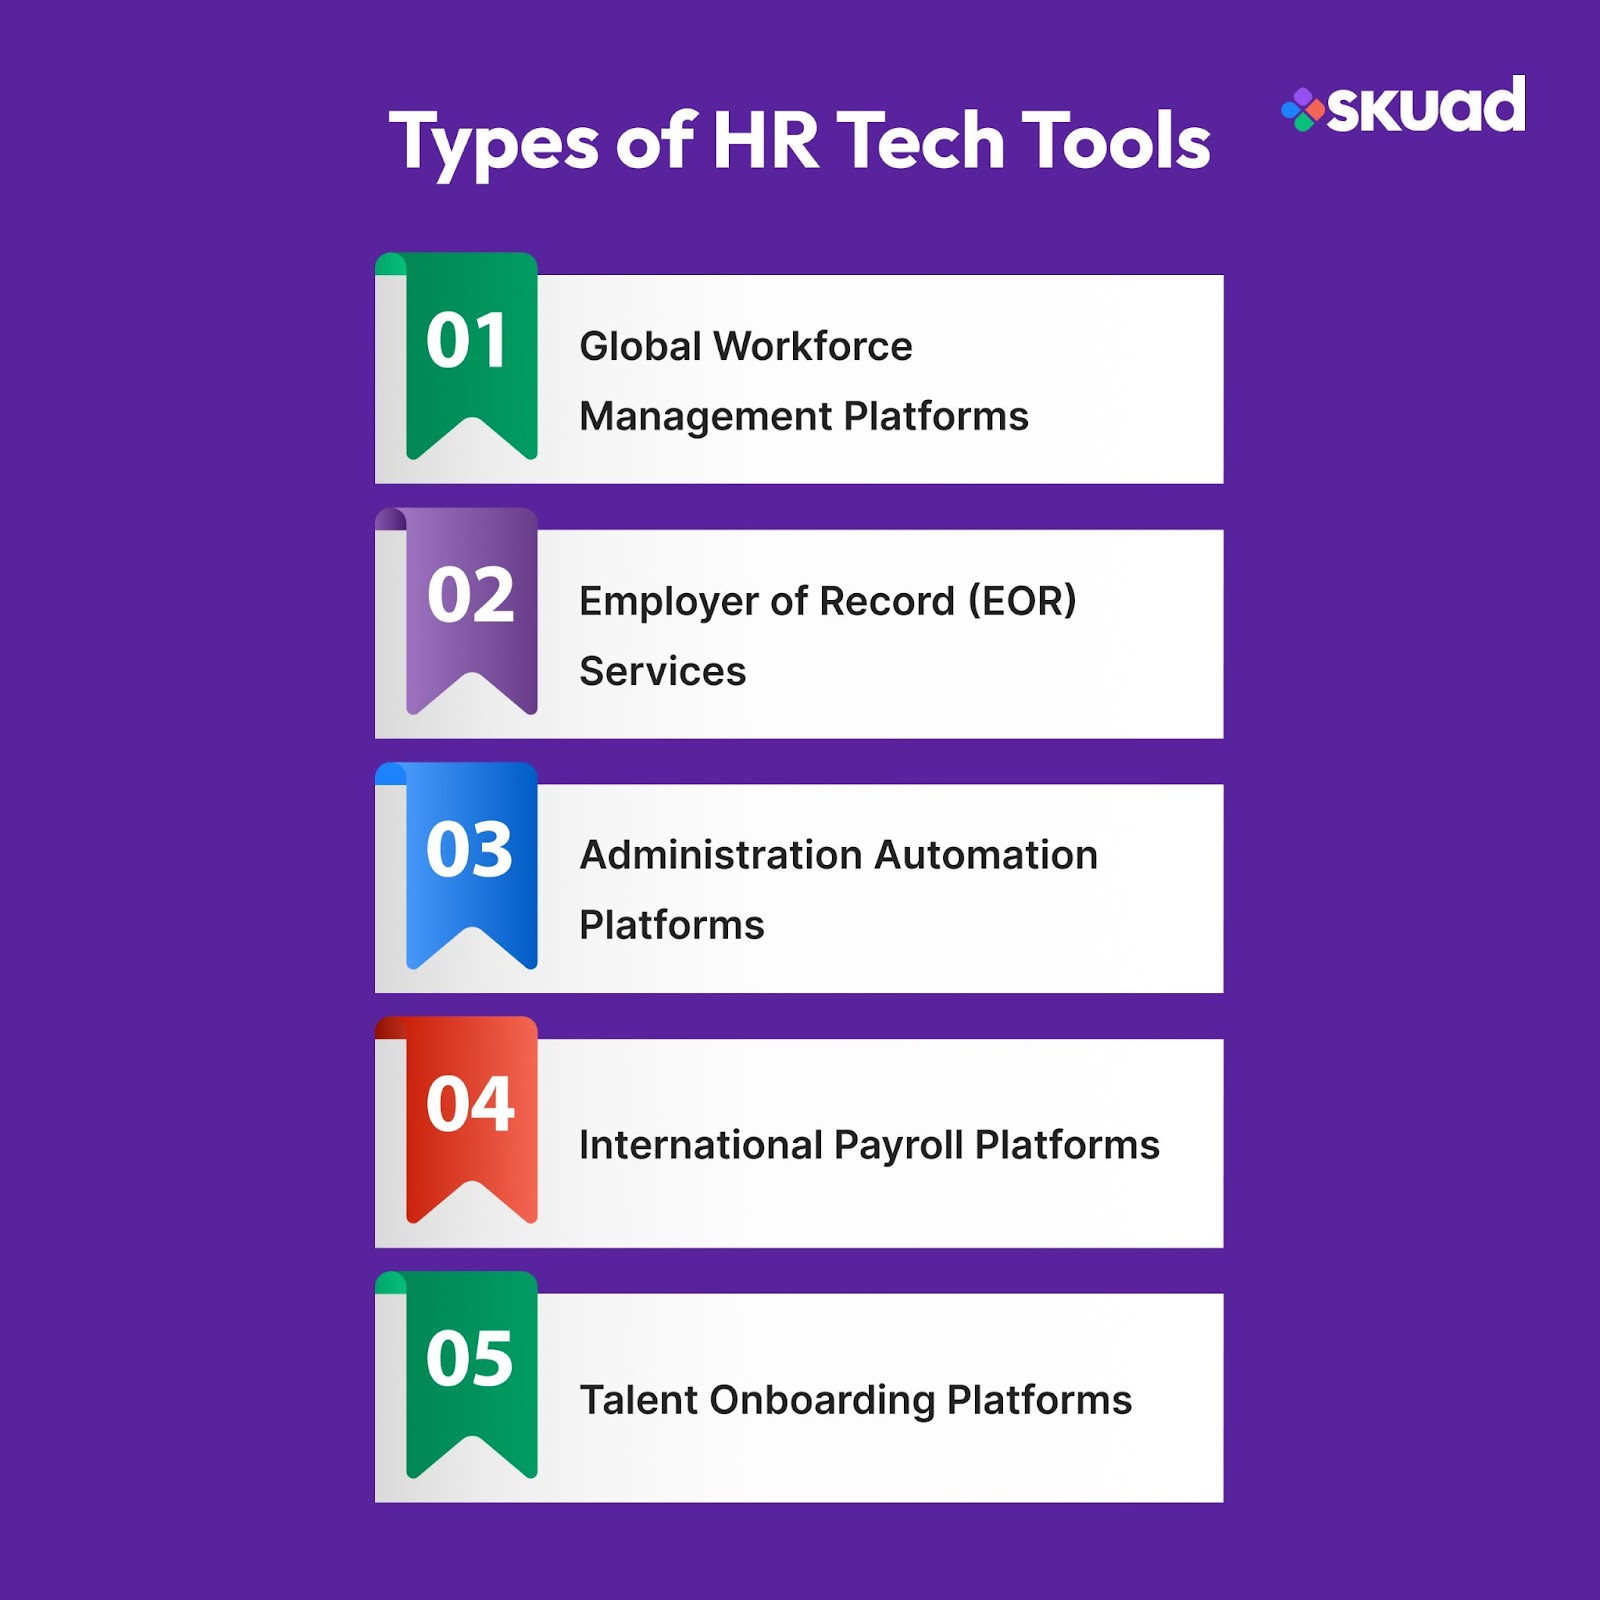 Types of HR tech tools